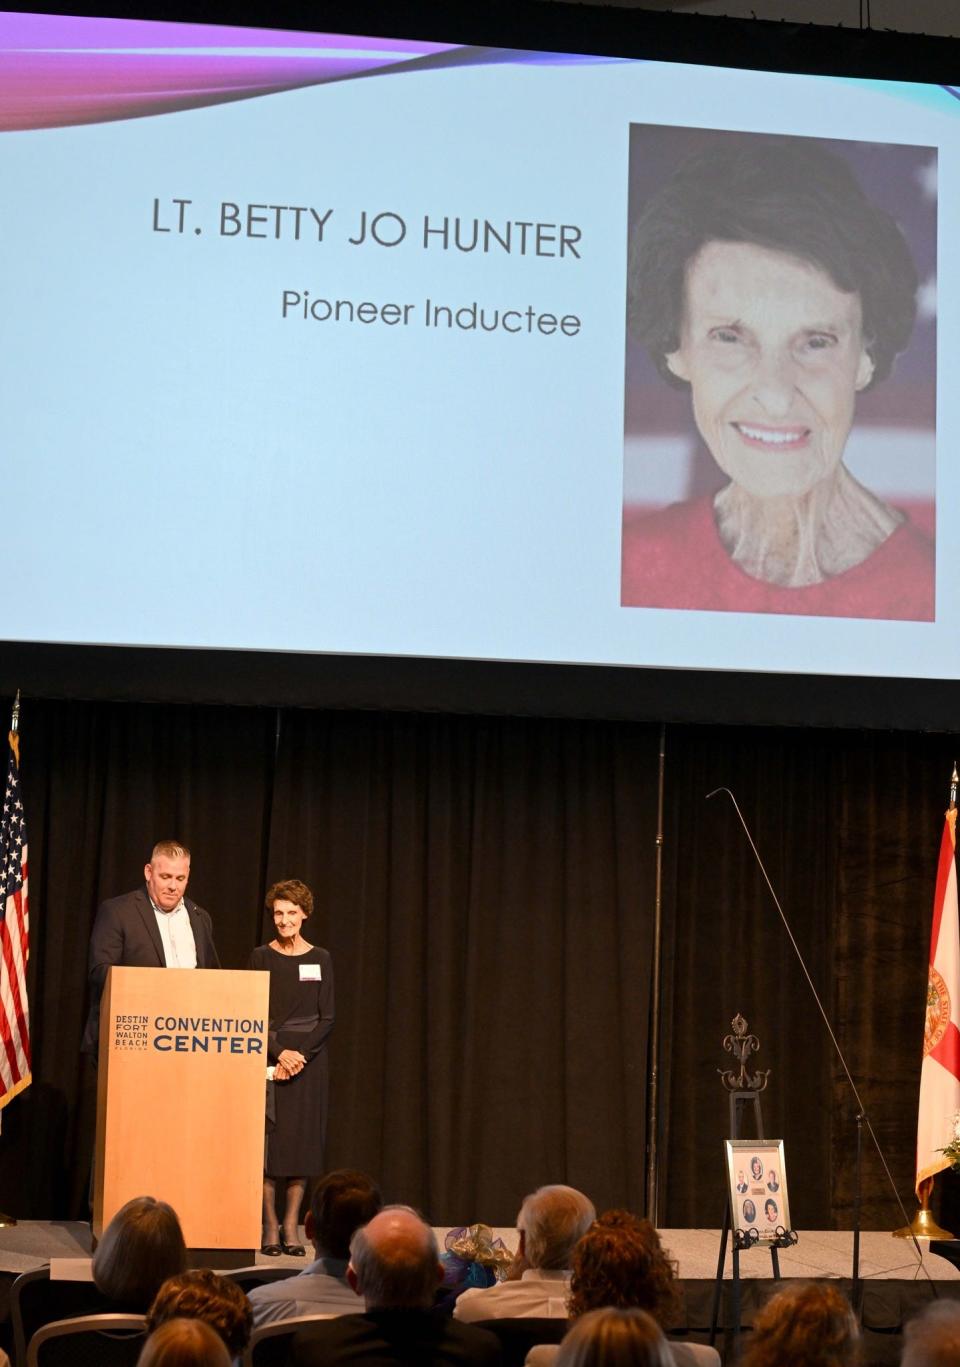 Lt. Betty Jo Hunter served with the Okaloosa County Sheriff's Office as the first female officer.